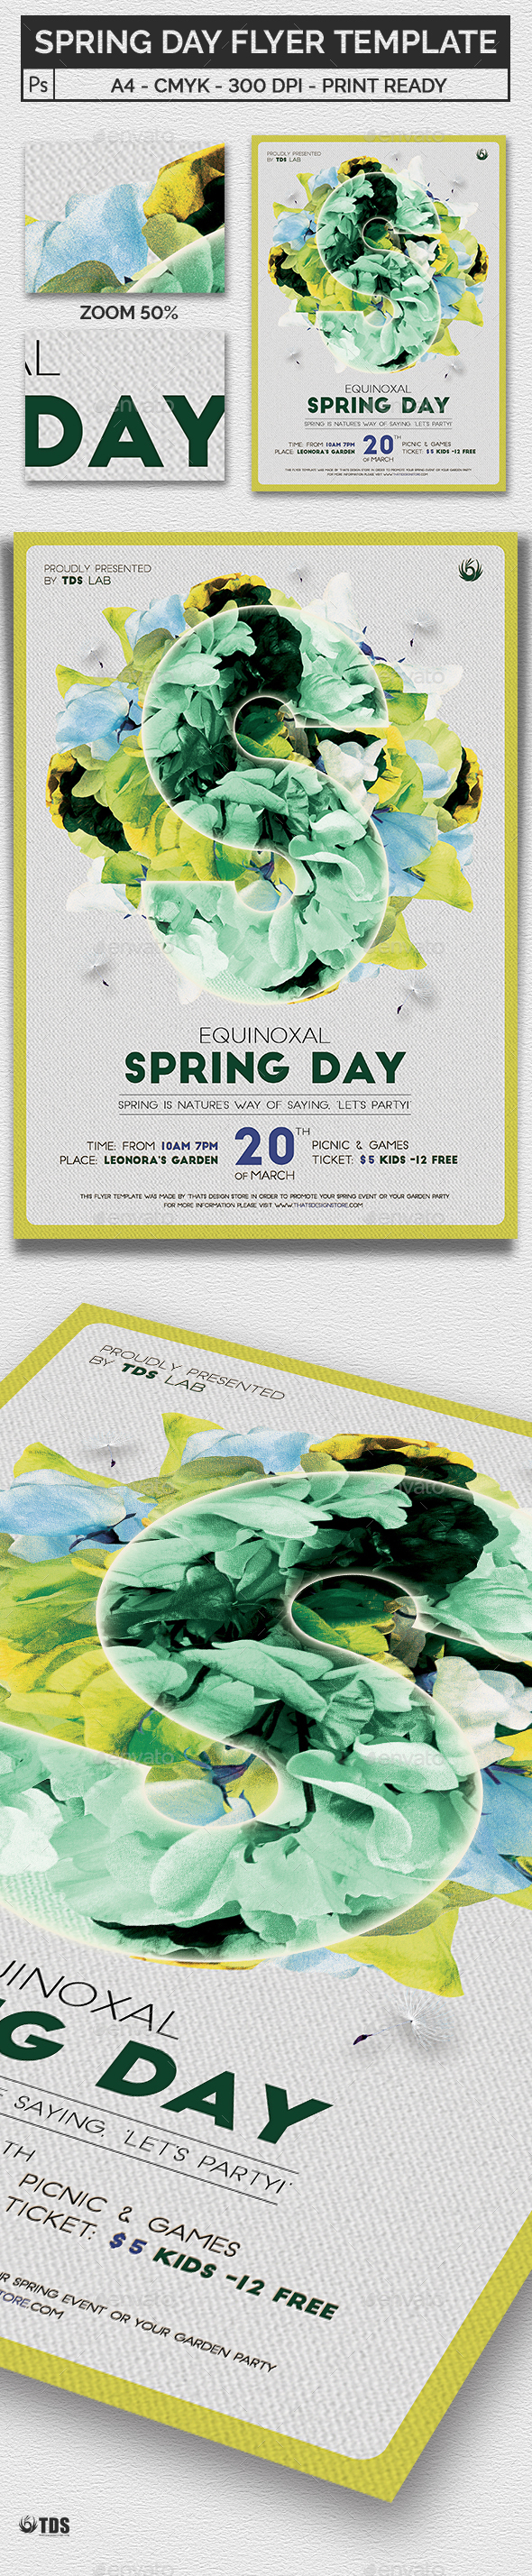 Spring Day Flyer Template